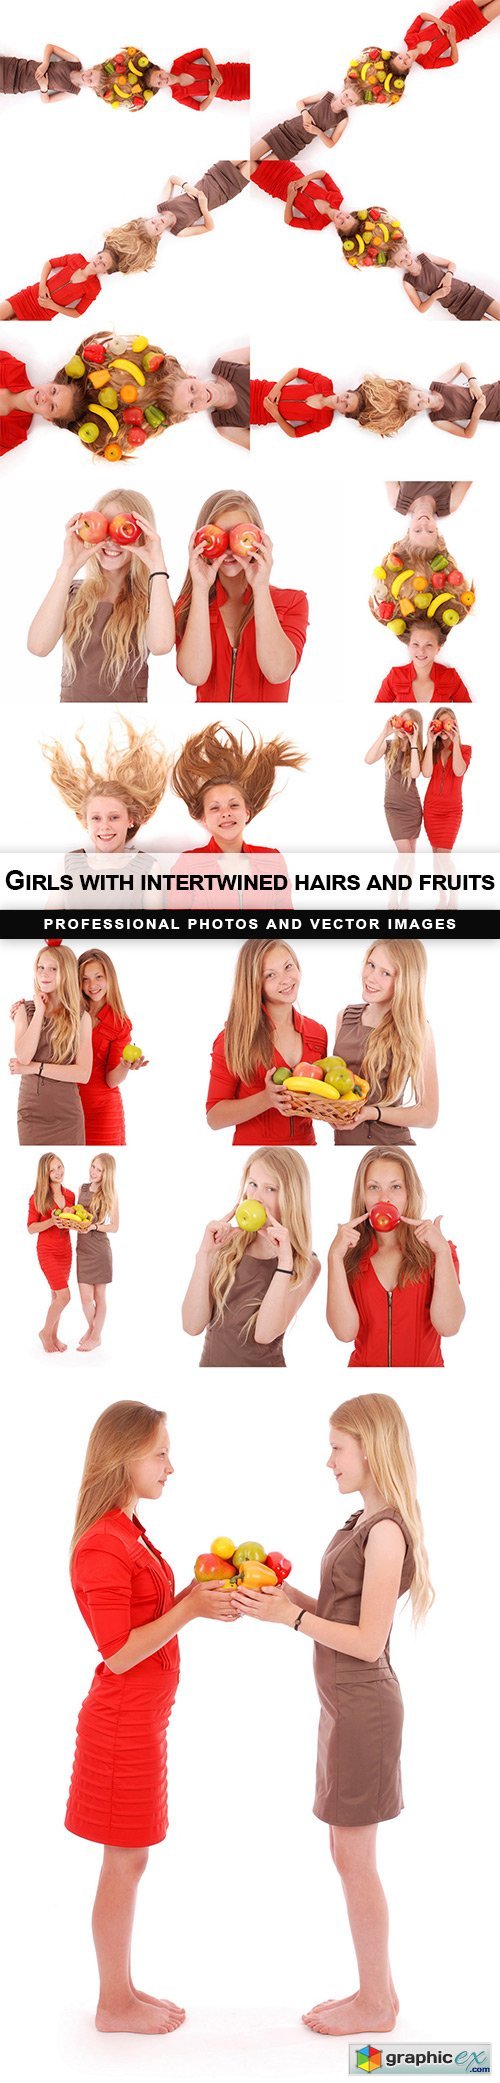 Girls with intertwined hairs and fruits